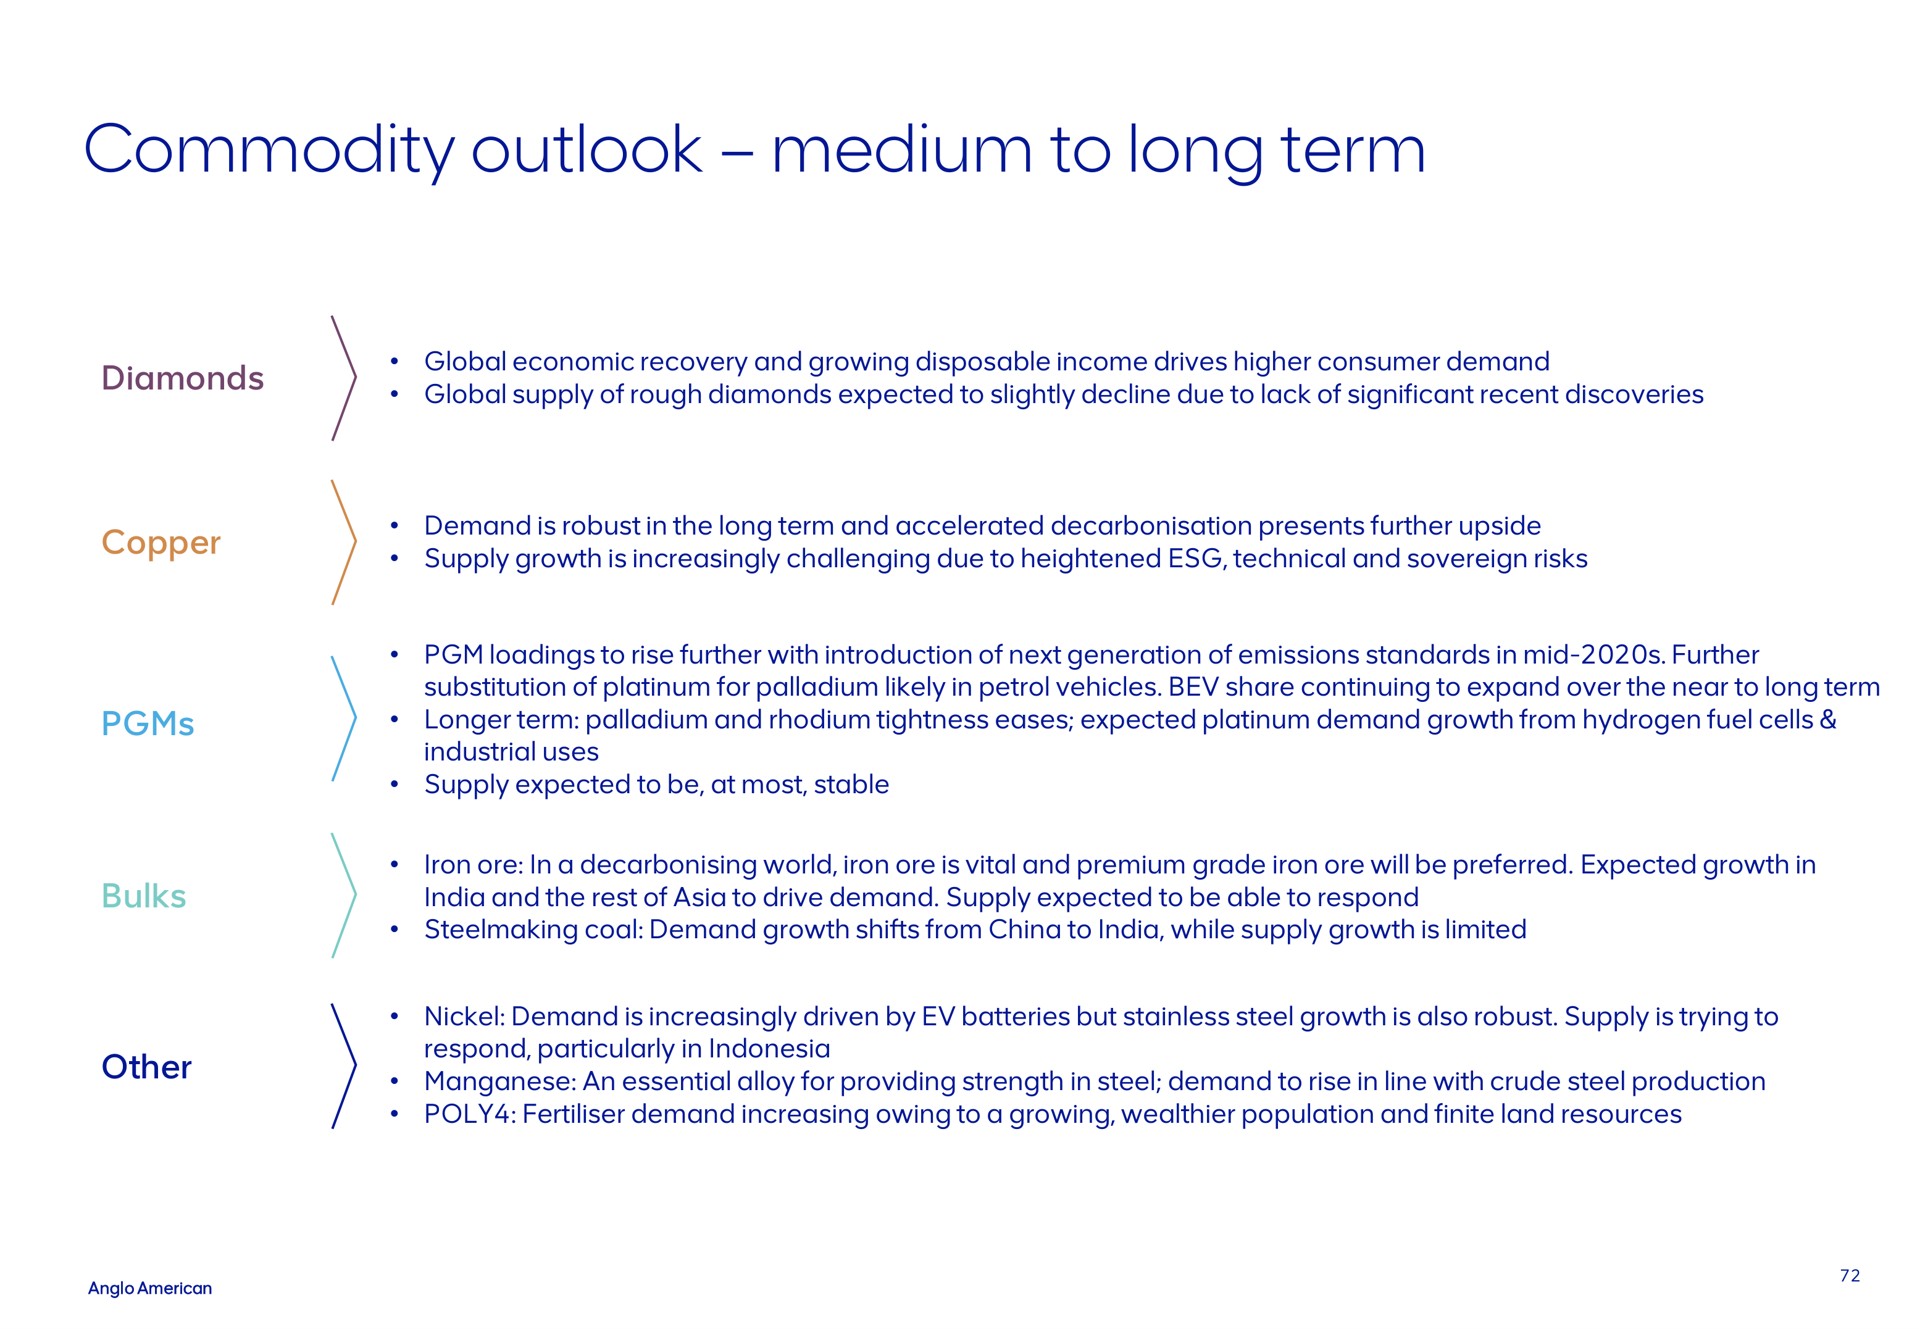 commodity outlook medium to long term | AngloAmerican